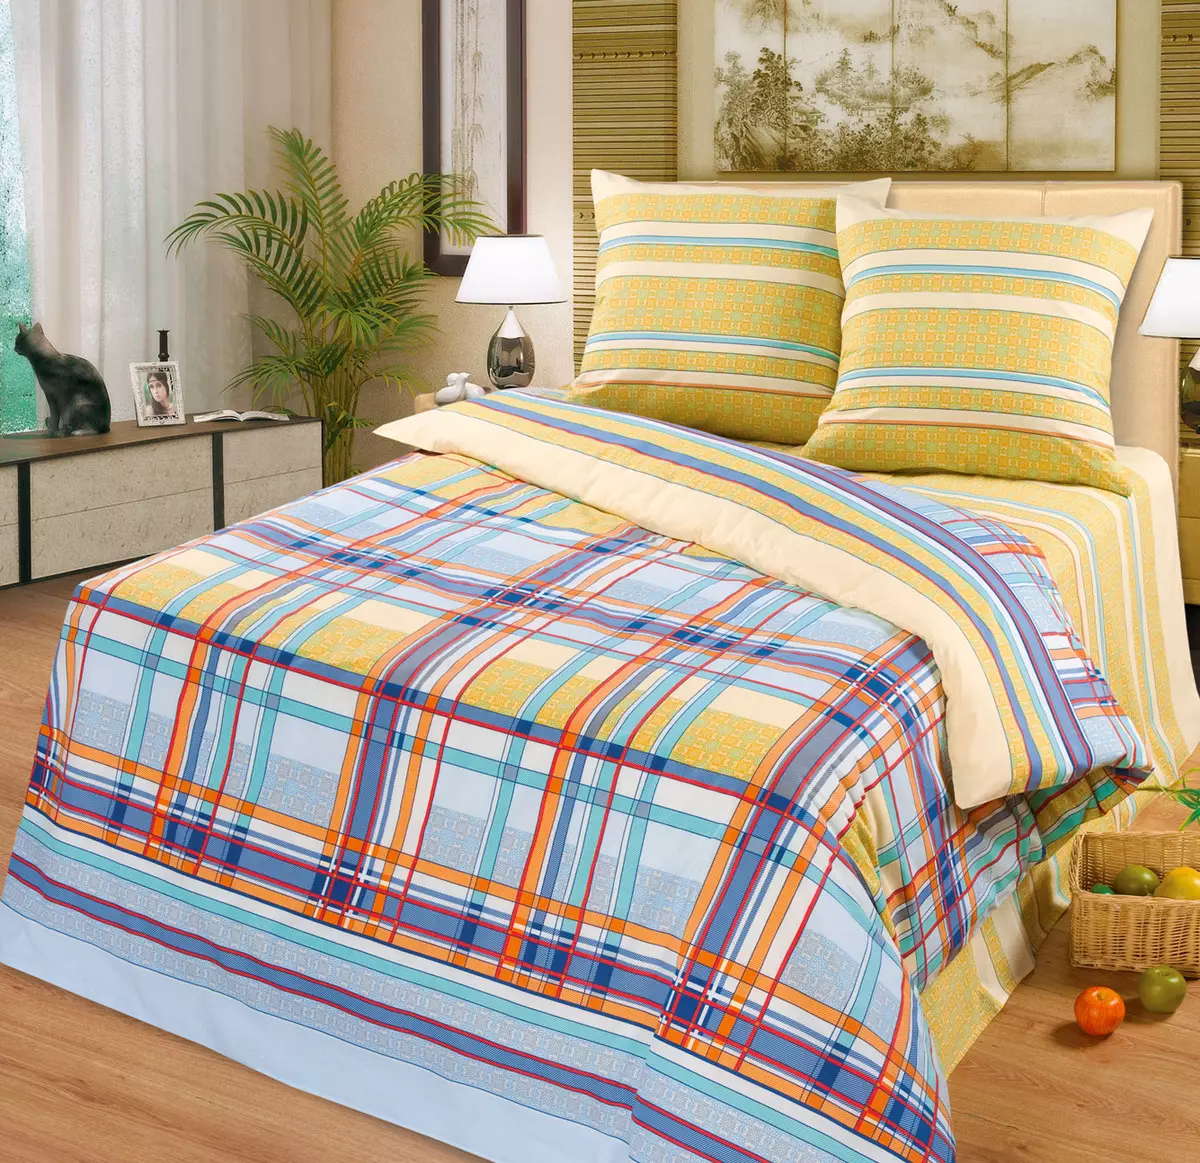 Bed linen fabric: What material is better to buy? Types and rating. How to choose high-quality bed? What are they sewed from? 24761_43